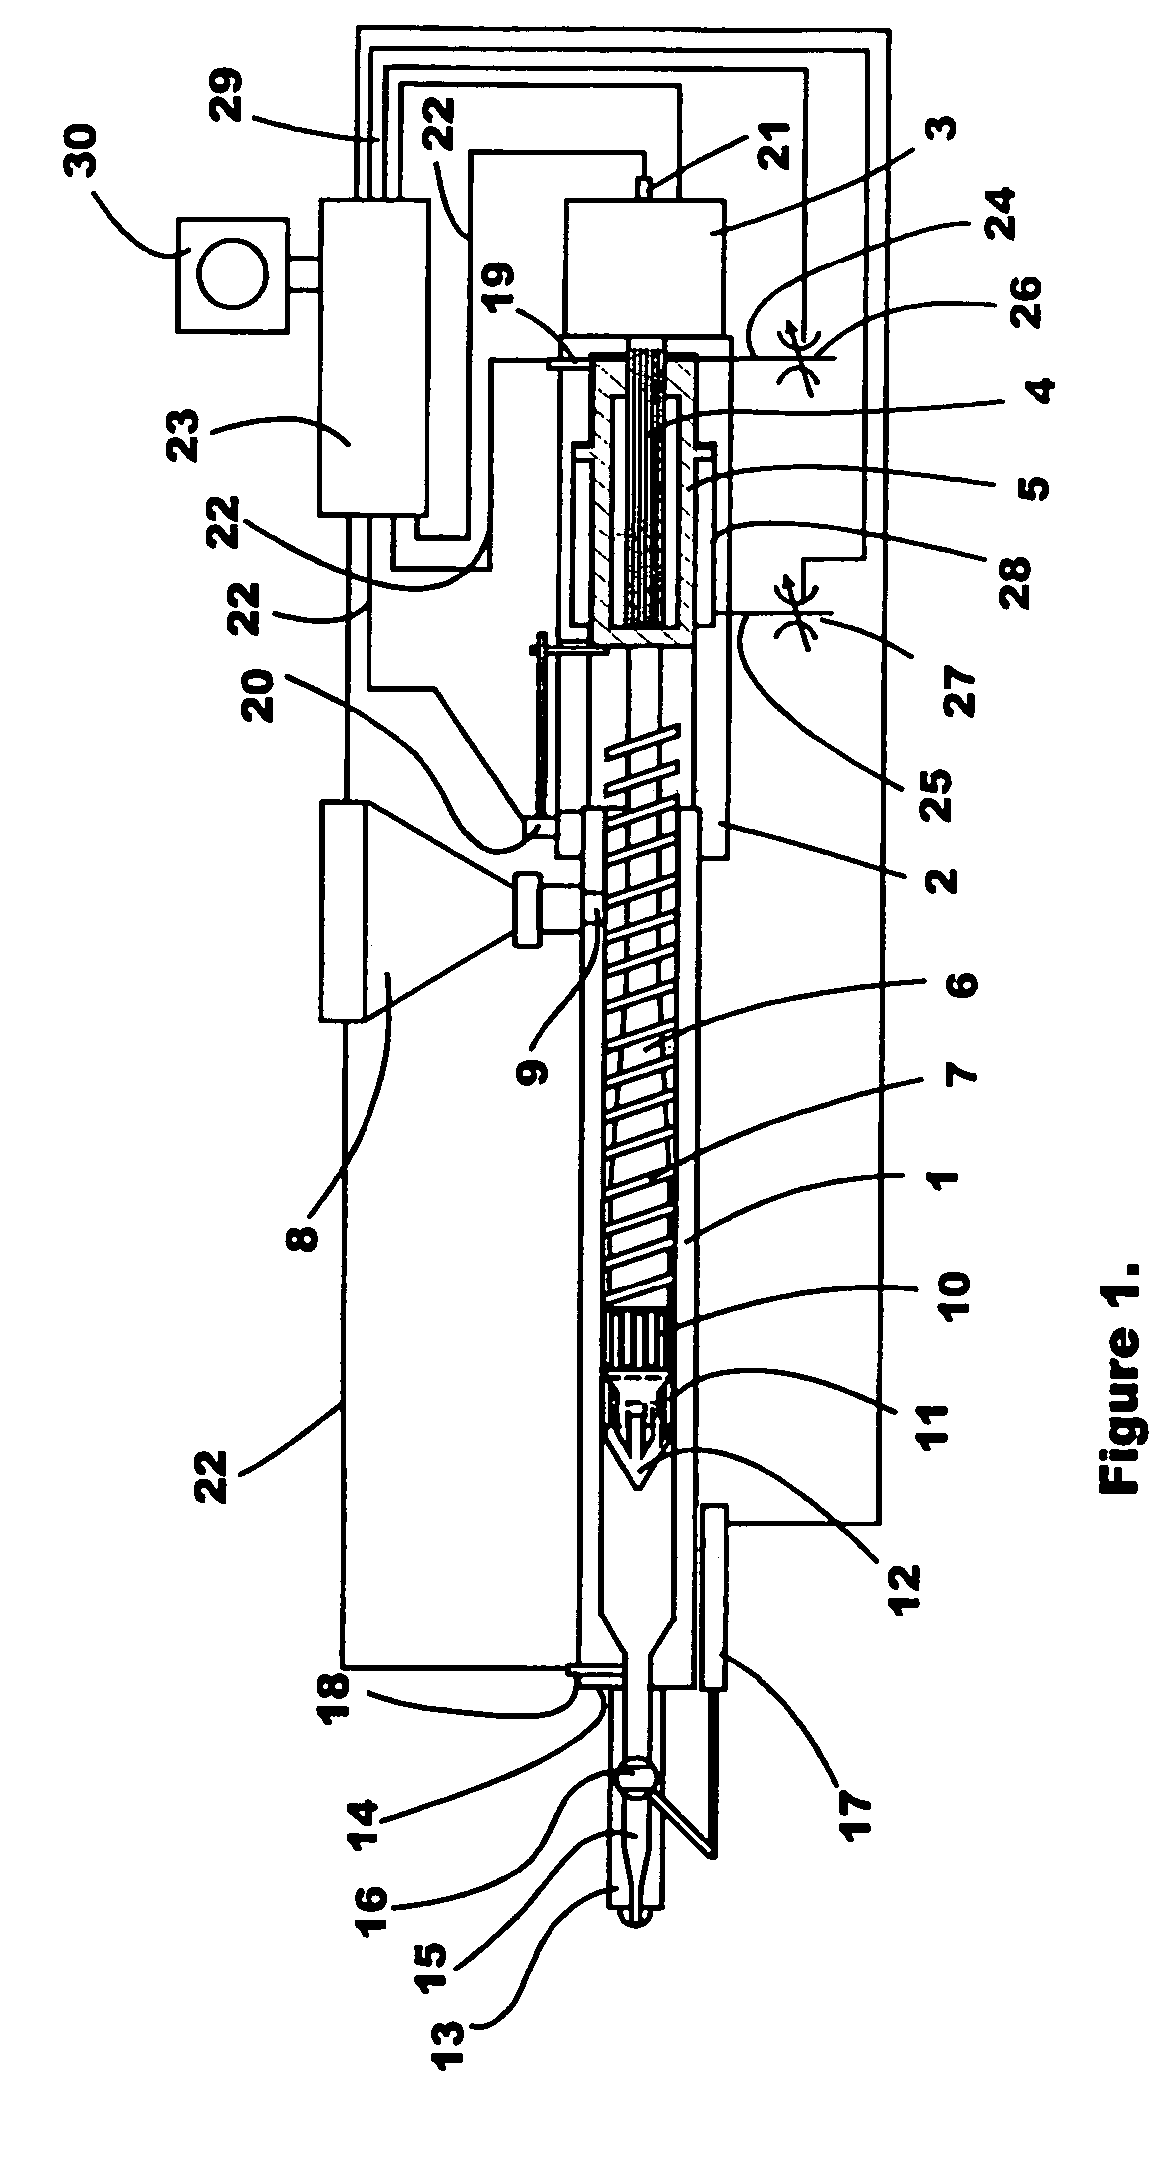 Injection molding method and apparatus for continuous plastication